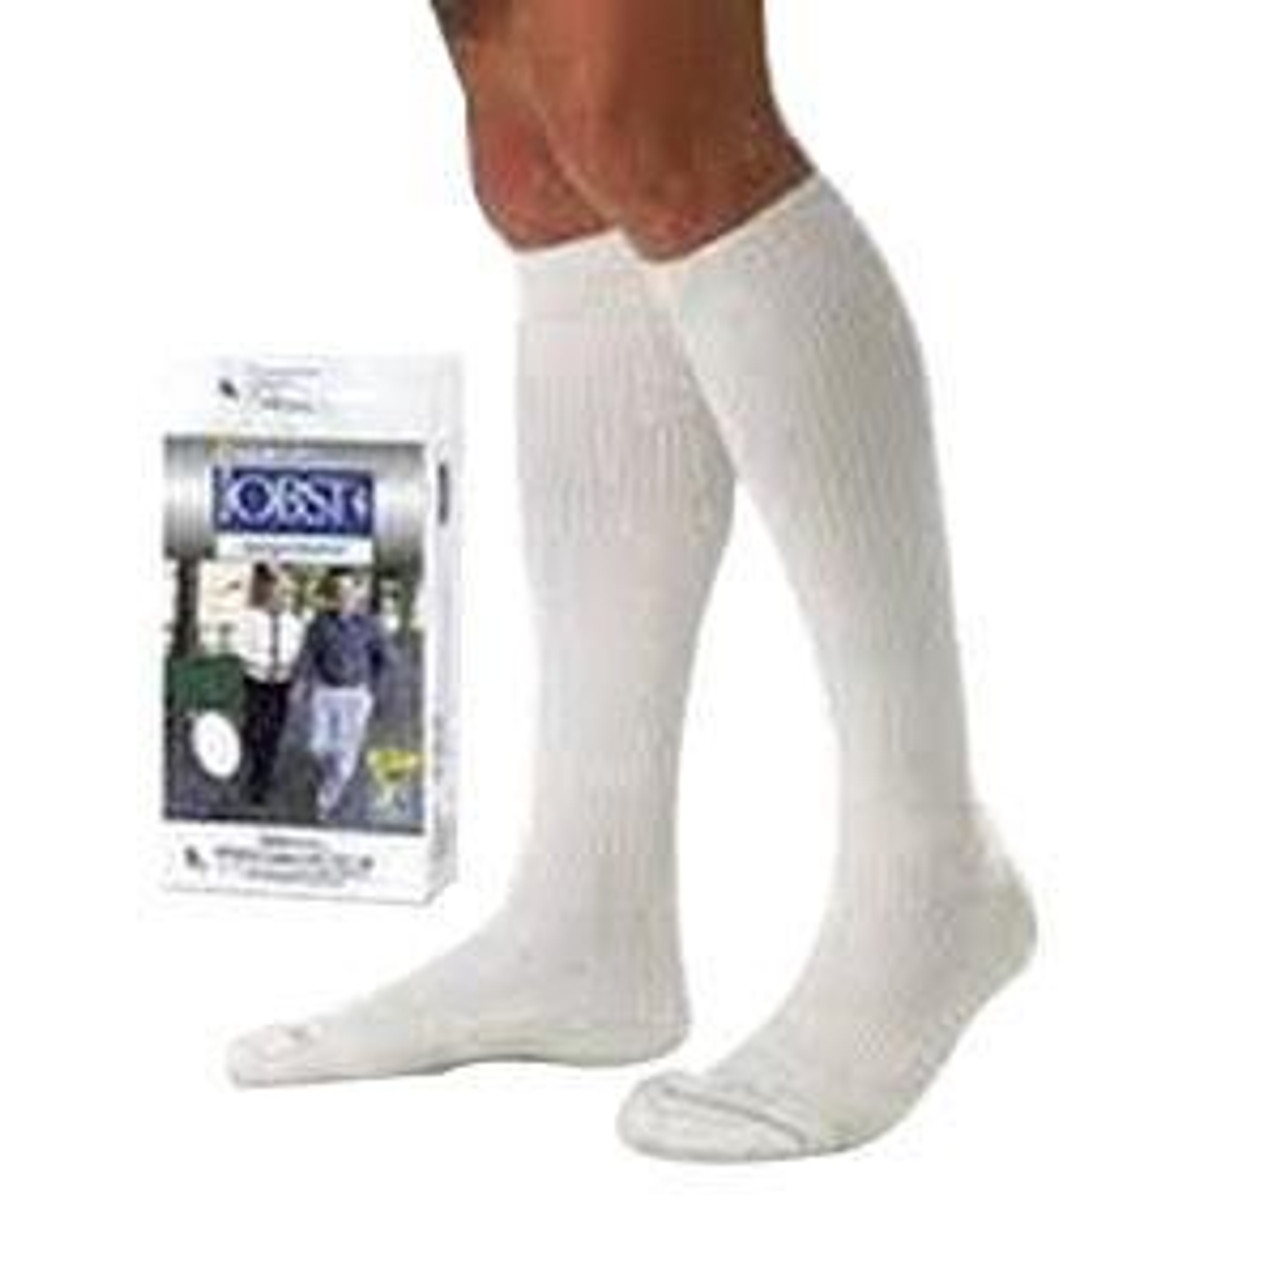 Jobst 115214 PAIR/1 JOBST KNEE-HIGH MODERATE COMPRESSION STOCKINGS, CLOSED TOE, LATEX-FREE, SIZE LARGE (Jobst 115214)